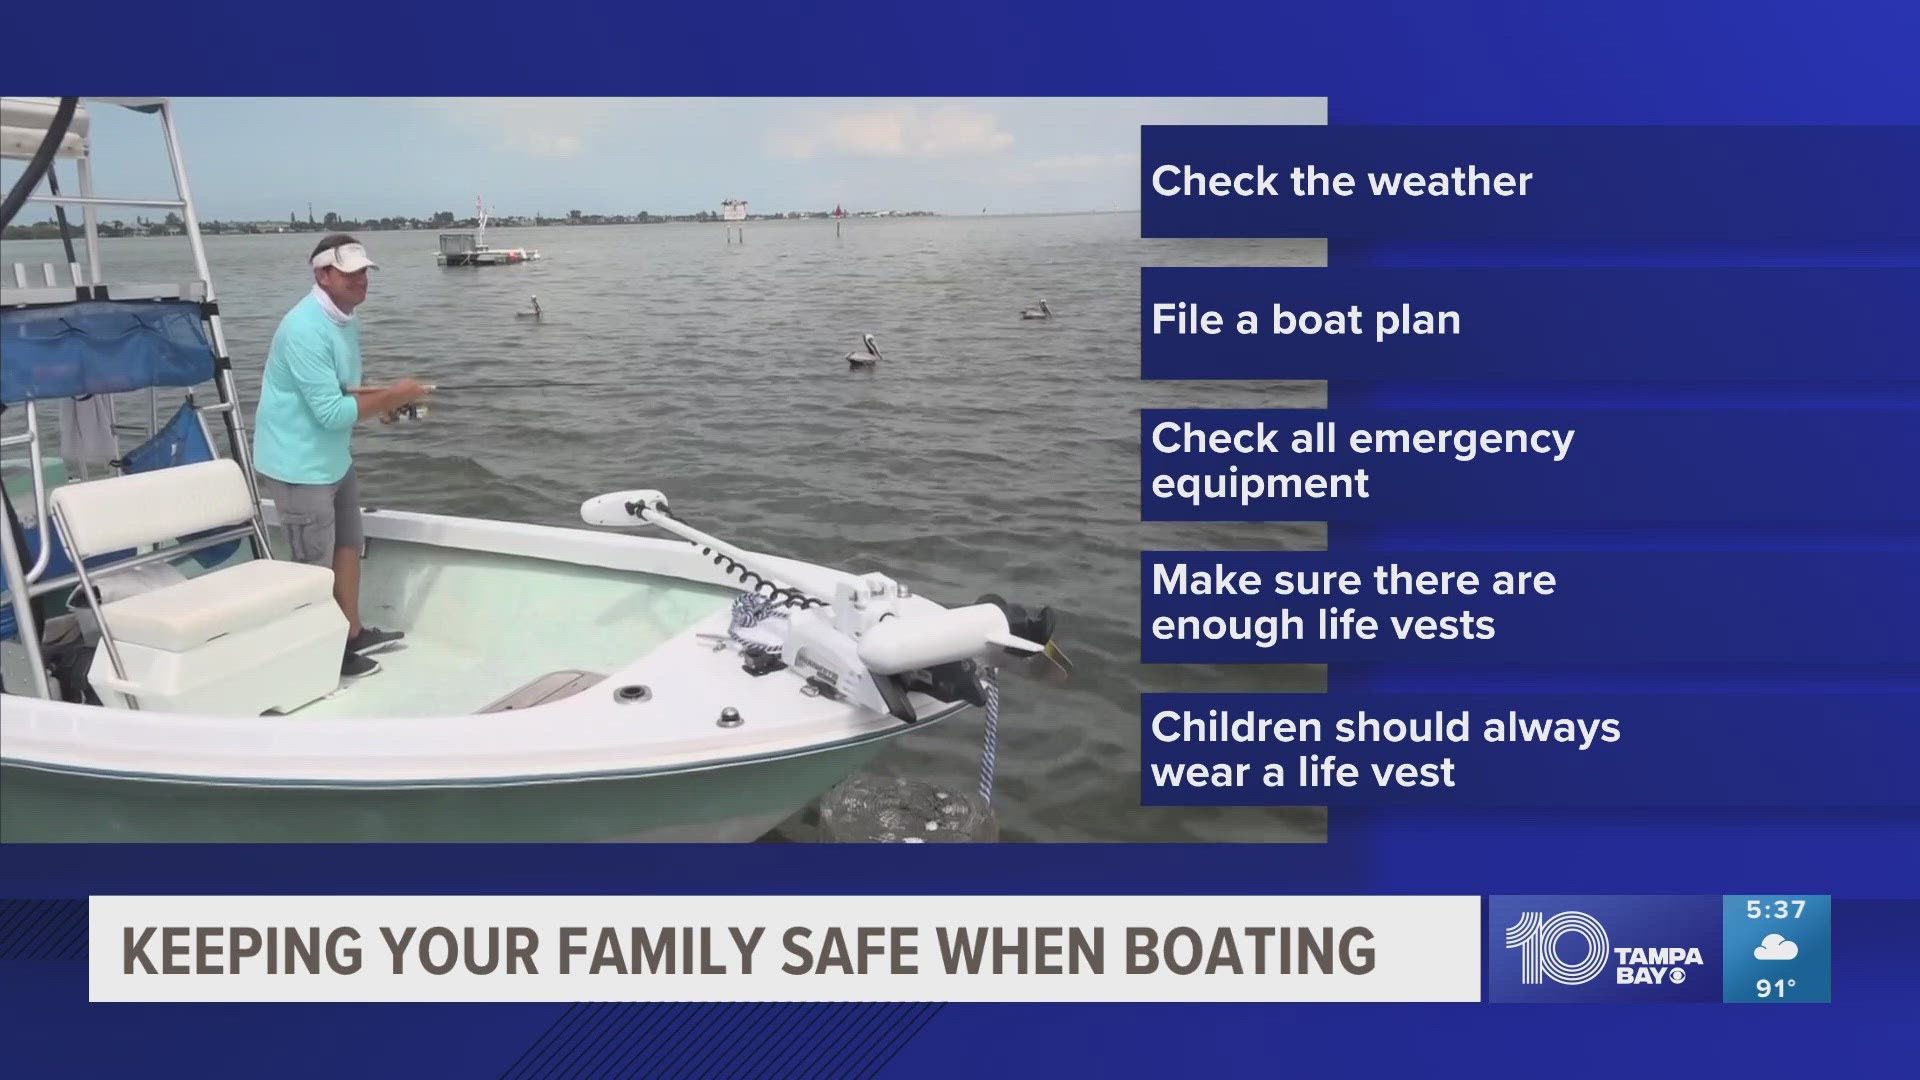 The FWC shares tips on how to stay safe when boating this Fourth of July.